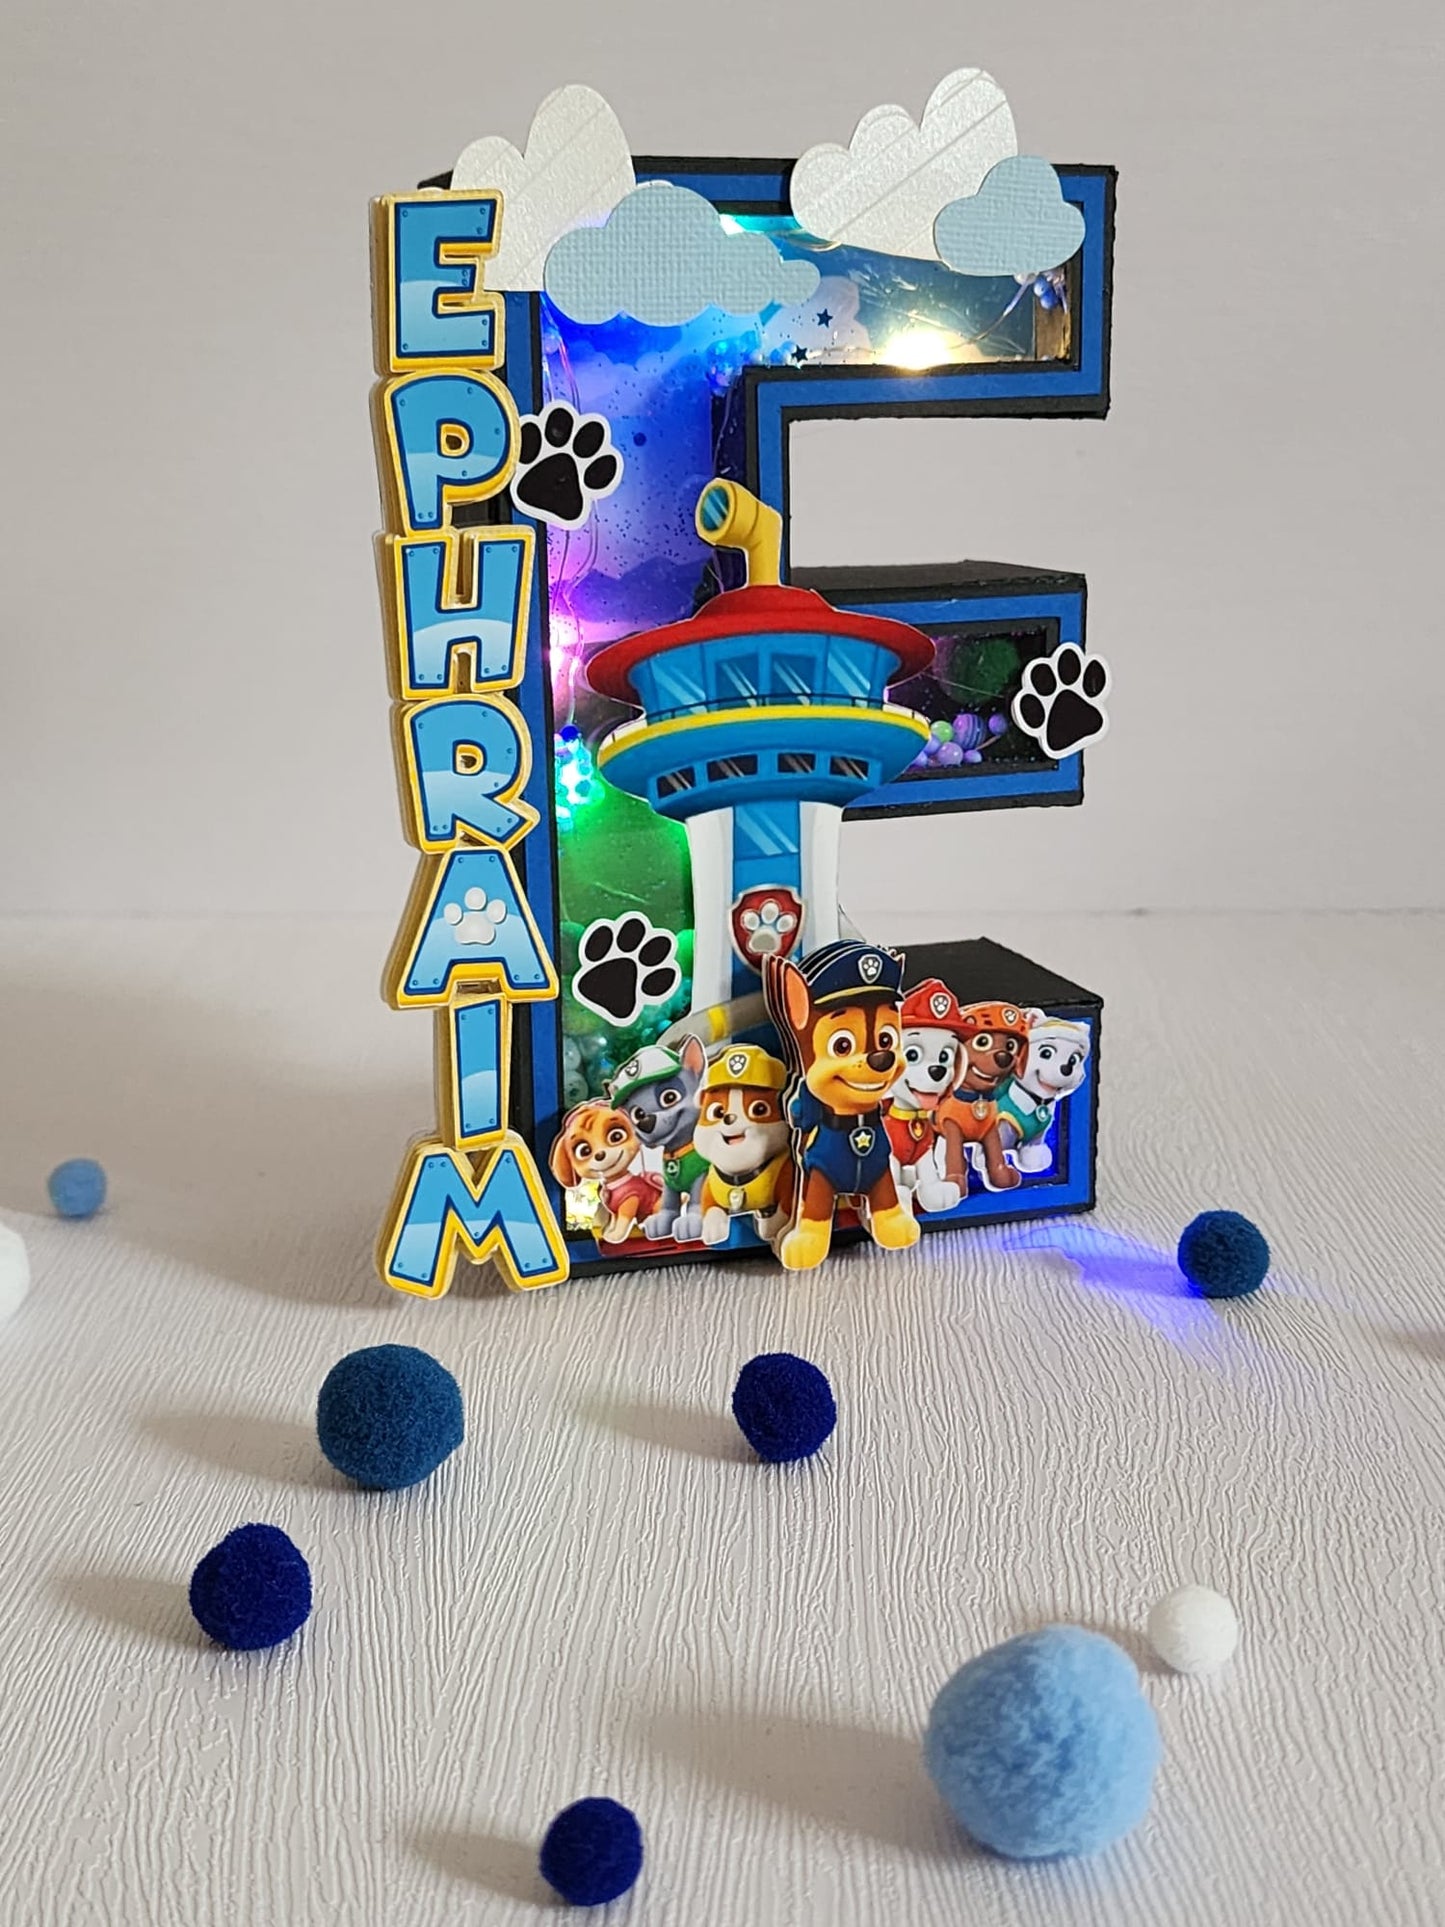 3D Letter and Number Block Standard Size - Paw Patrol